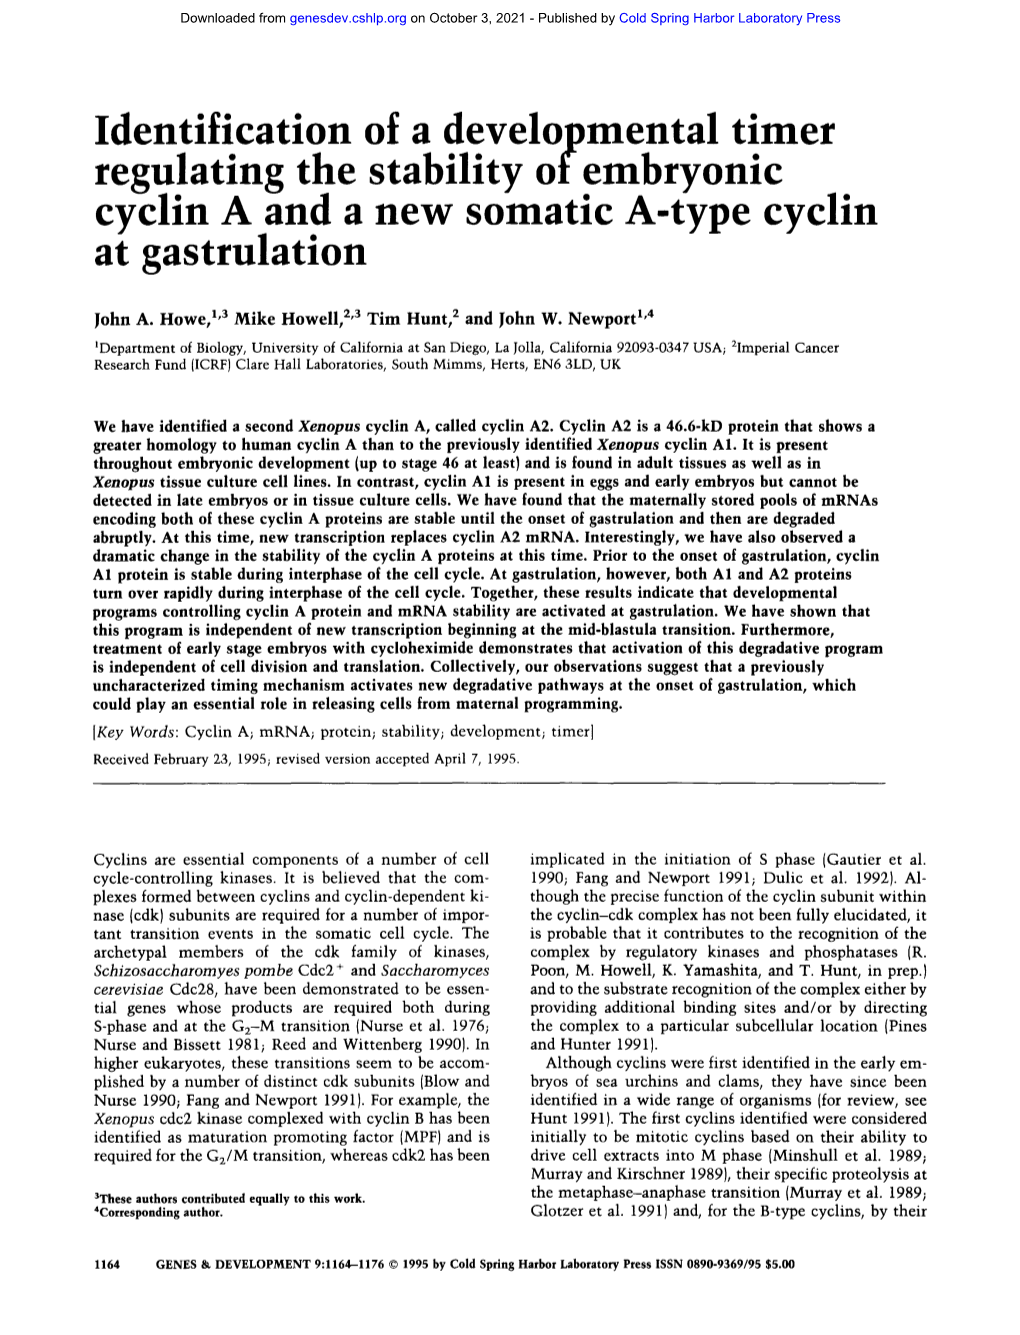 Identification of a Developmental Timer Regulating the Stability of Embryonic Cyclin a and a New Somatic A-Type Cyclin at Gastrulation